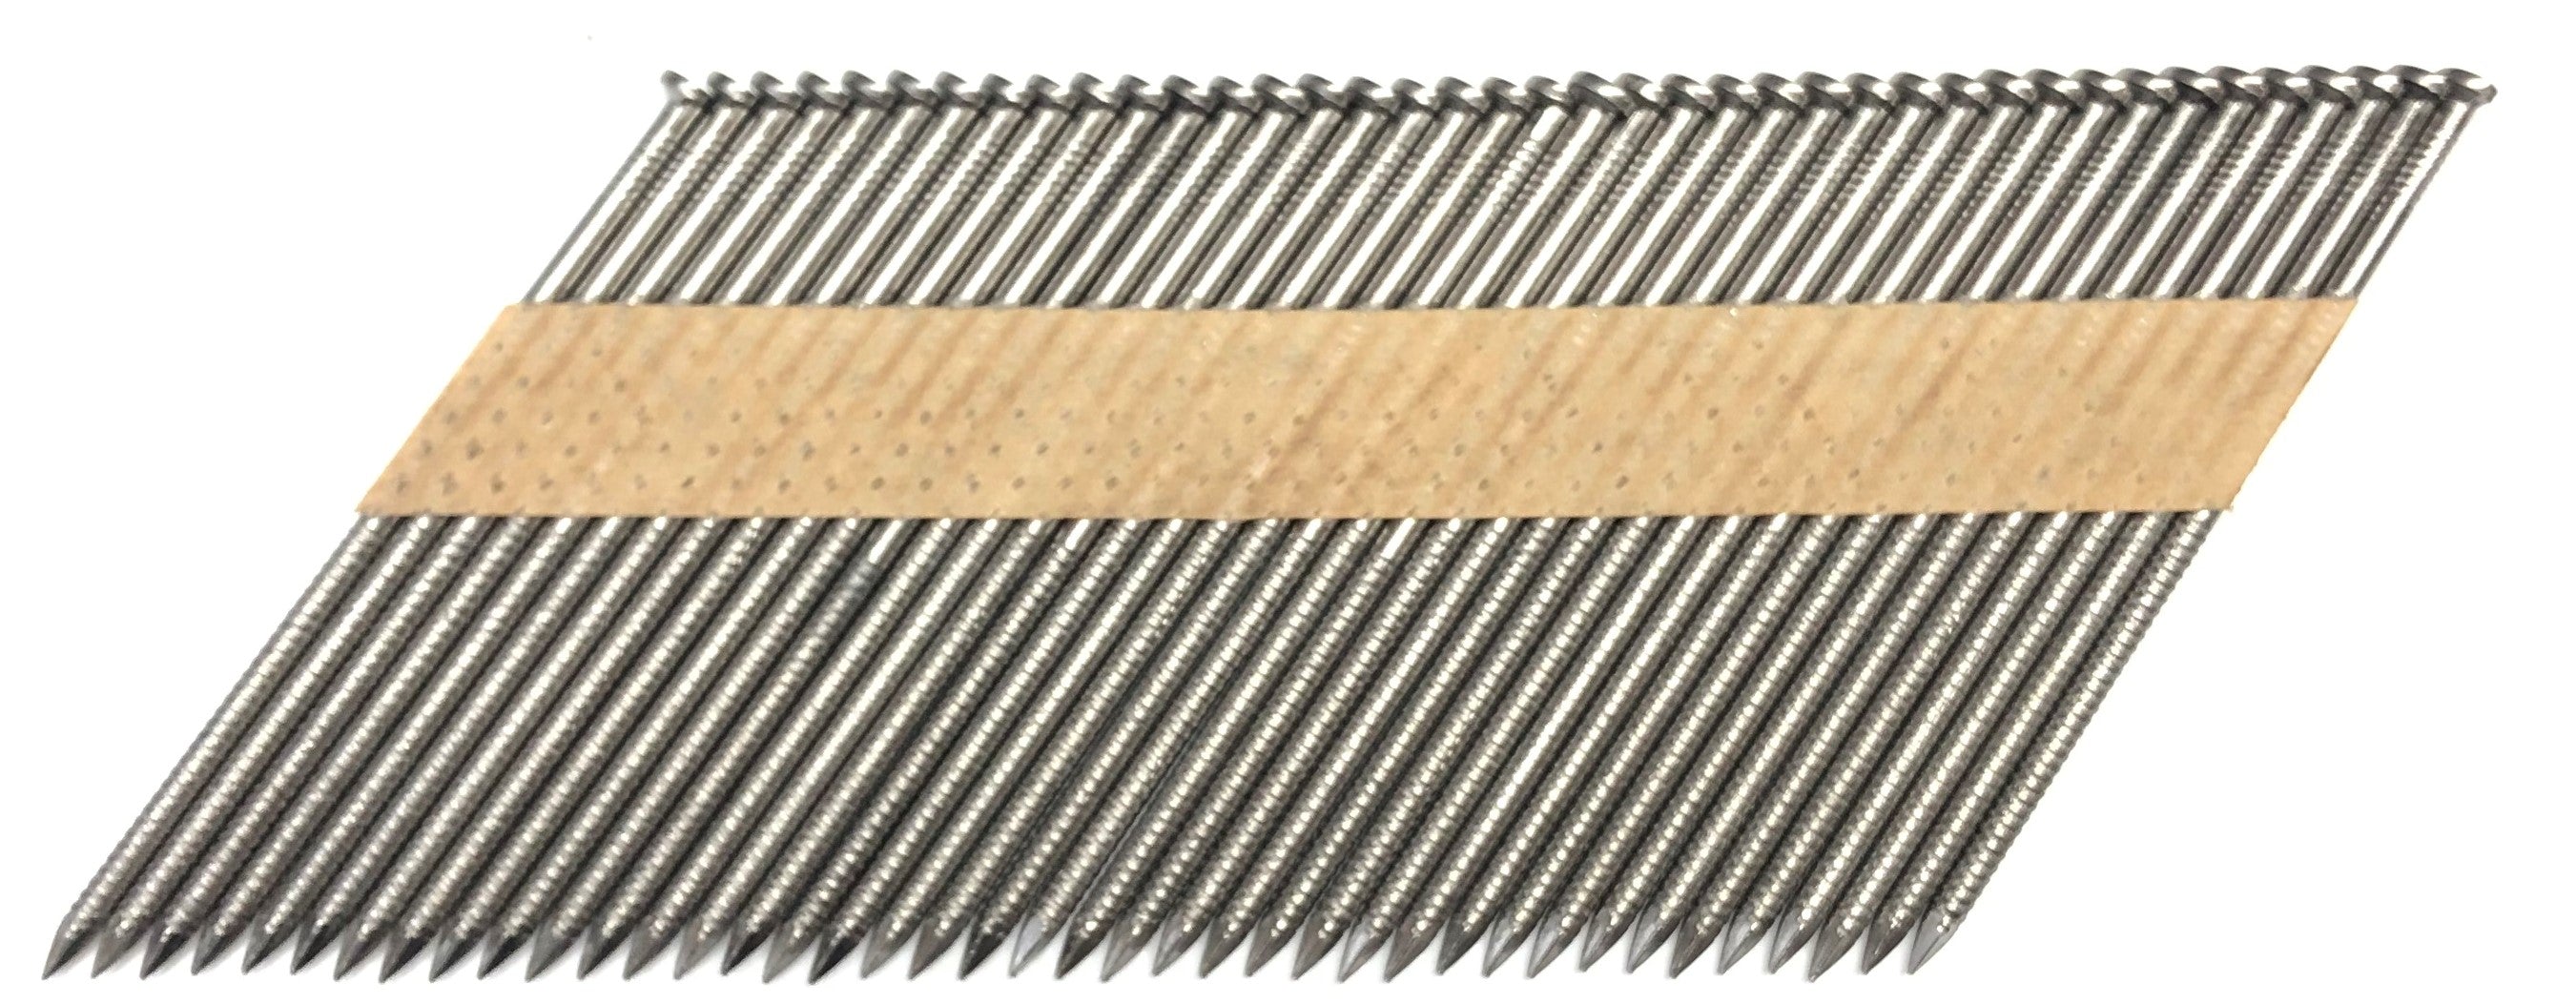 Senco 304 Stainless 90 x 3.15mm R/Shank Collated D Head  (1000 pack) – No Gas